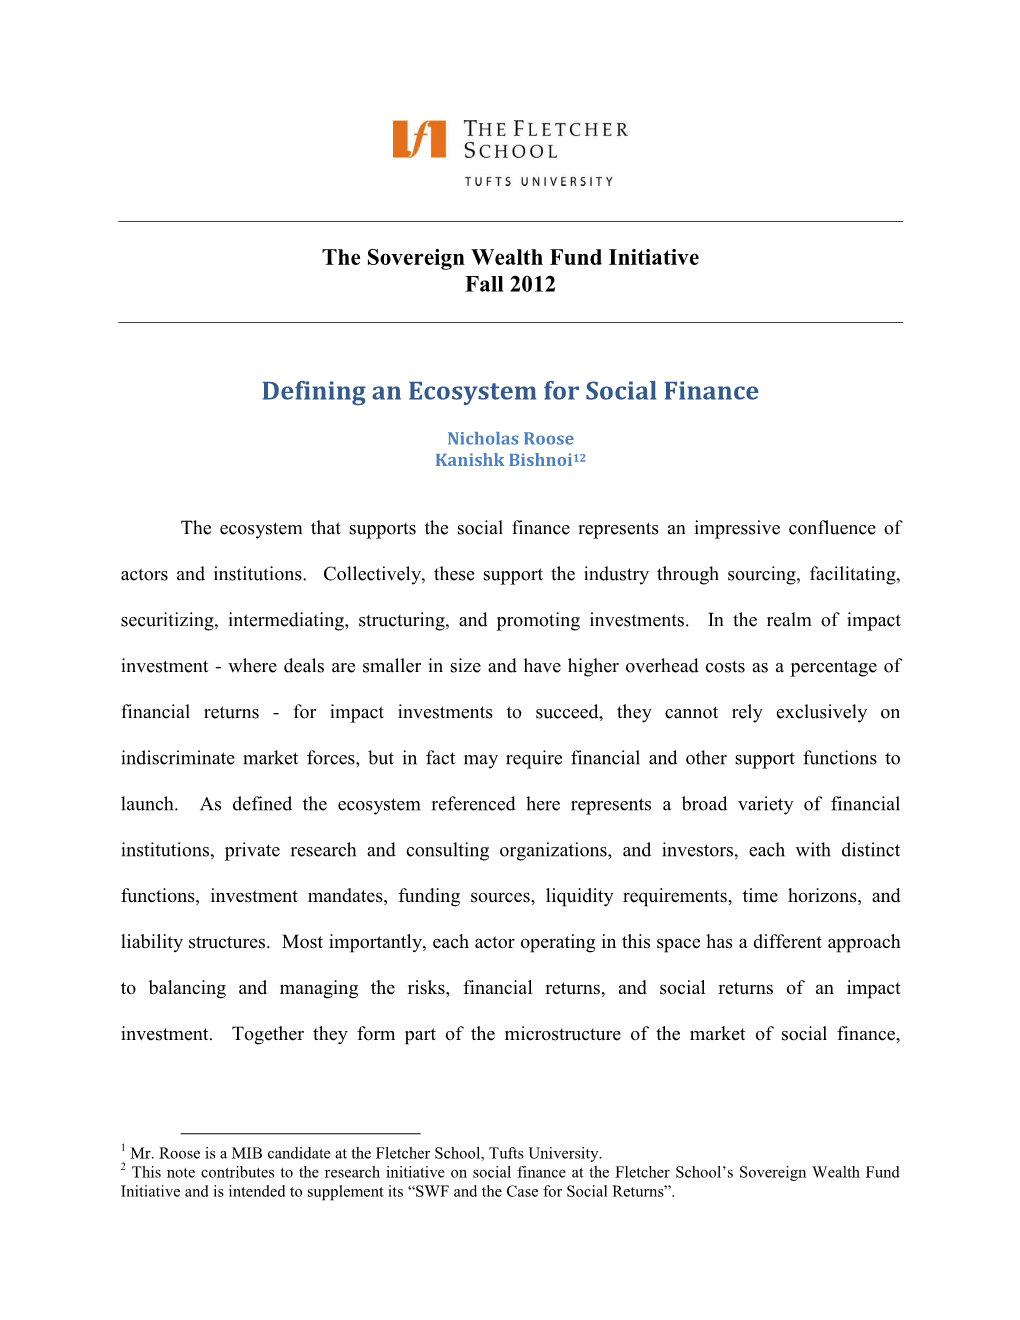 Defining an Ecosystem for Social Finance